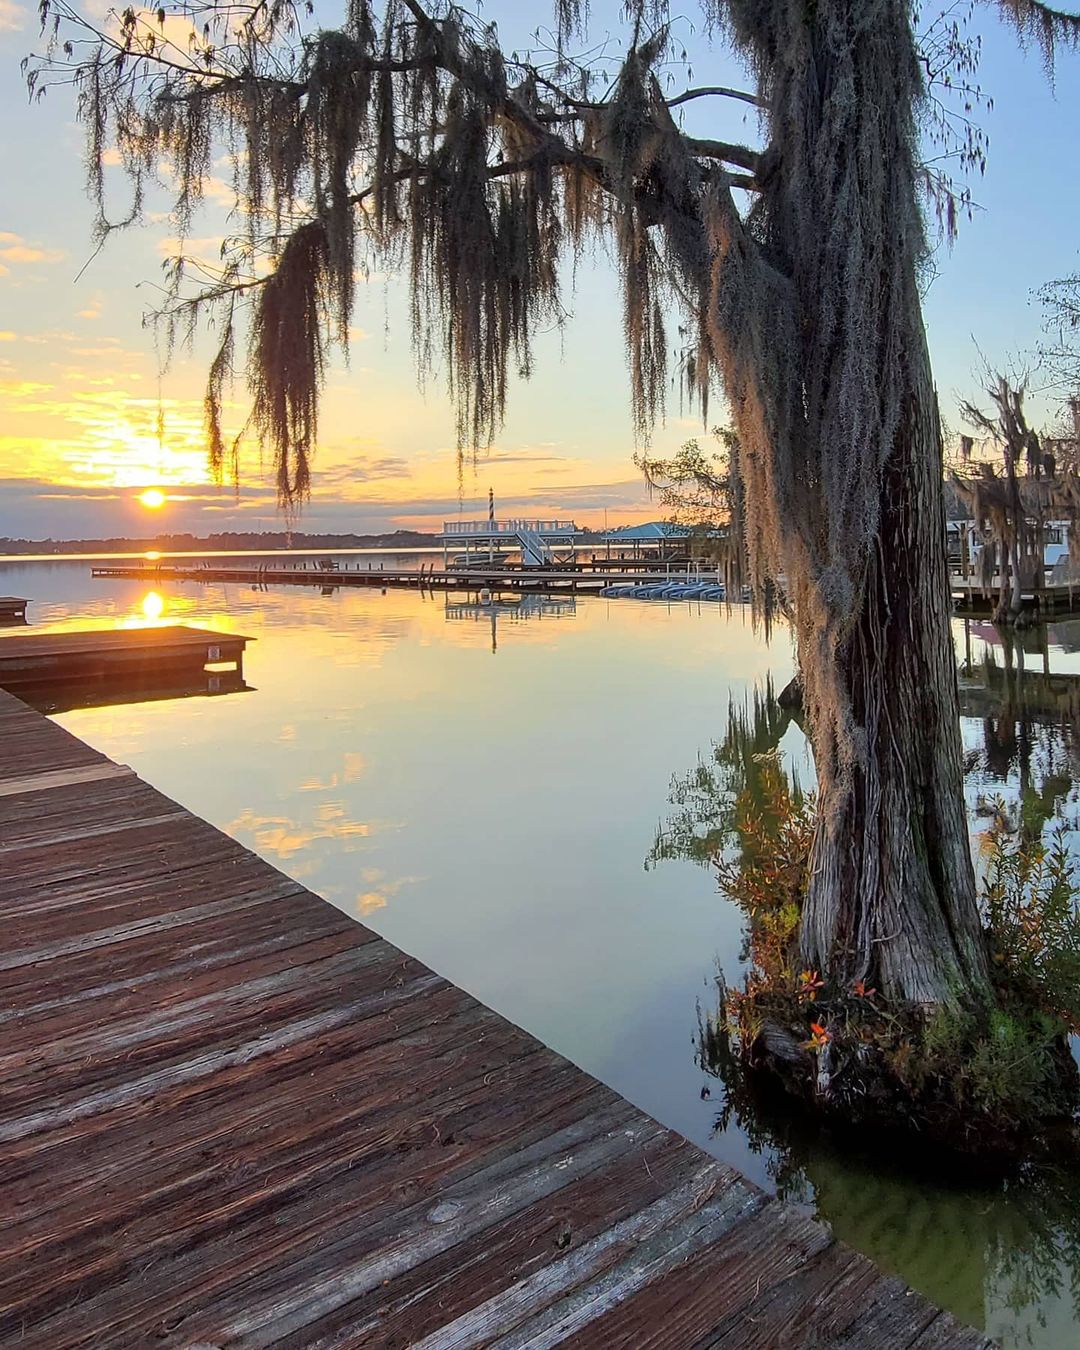 Sunset view from a dock at White Lake in North Carolina. Photo by Instagram user @whitelakejlc